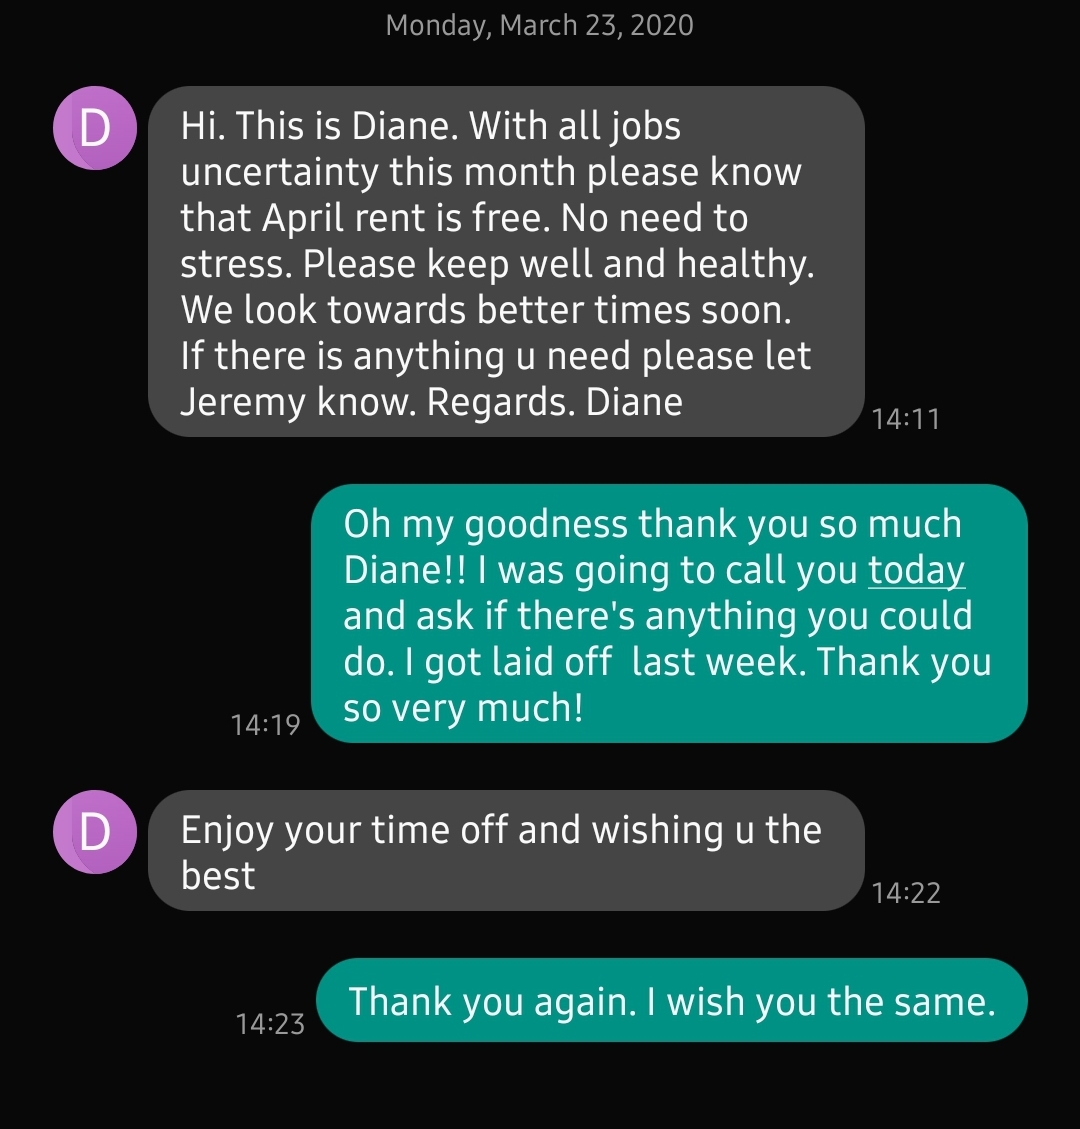 screenshot - Monday, Hi. This is Diane. With all jobs uncertainty this month please know that April rent is free. No need to stress. Please keep well and healthy. We look towards better times soon. If there is anything u need please let Jeremy know. Regar